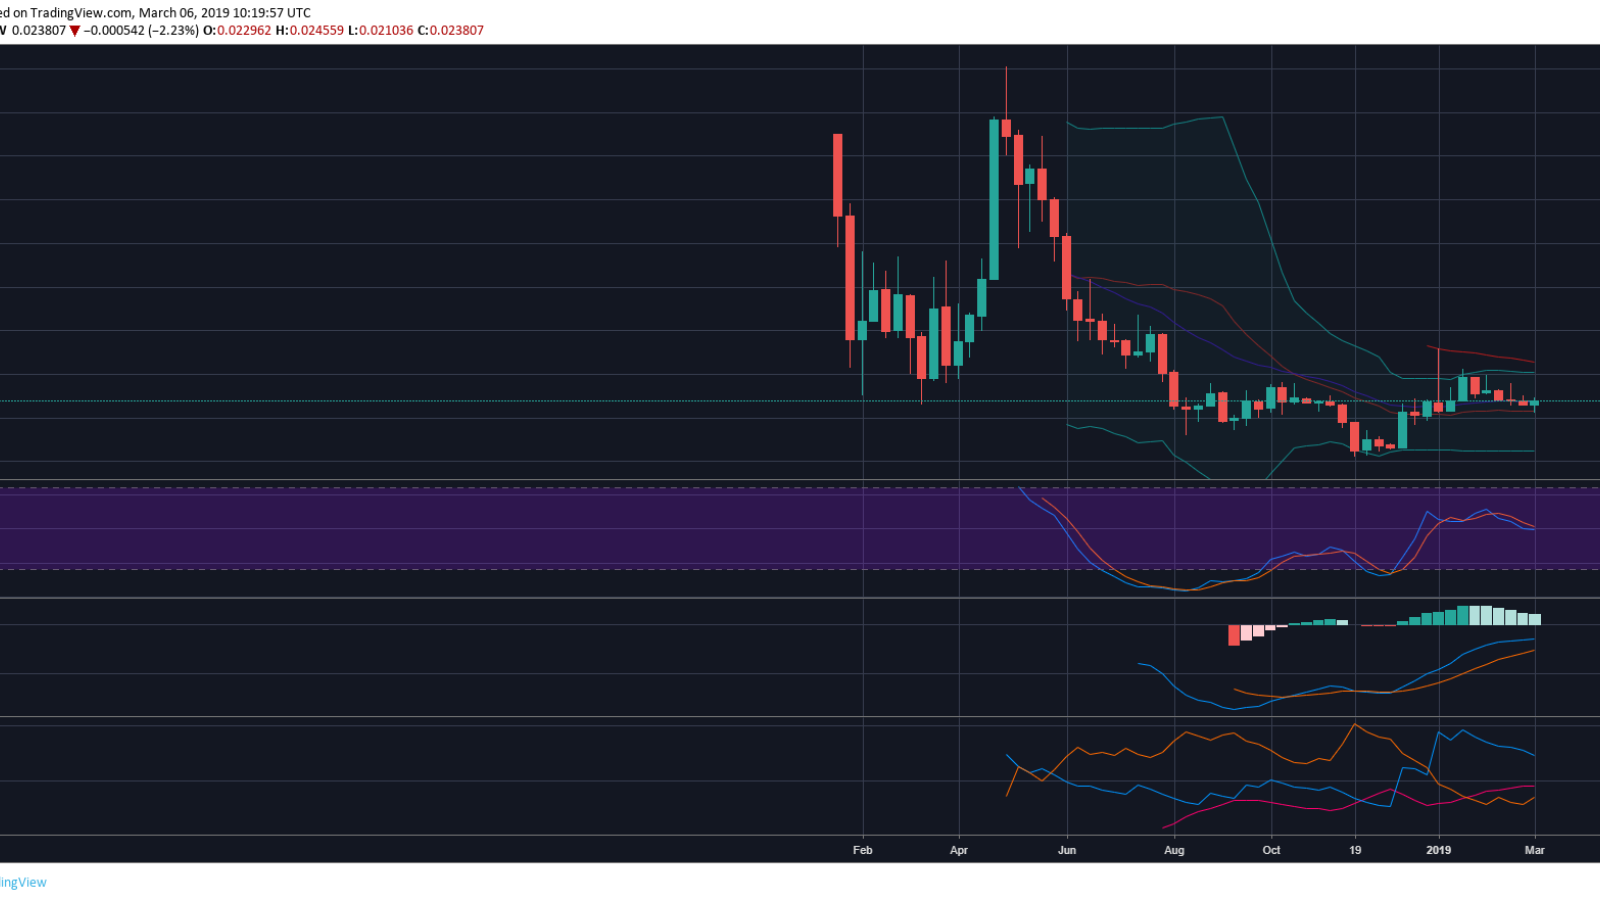 Tron price forecast weekly chart